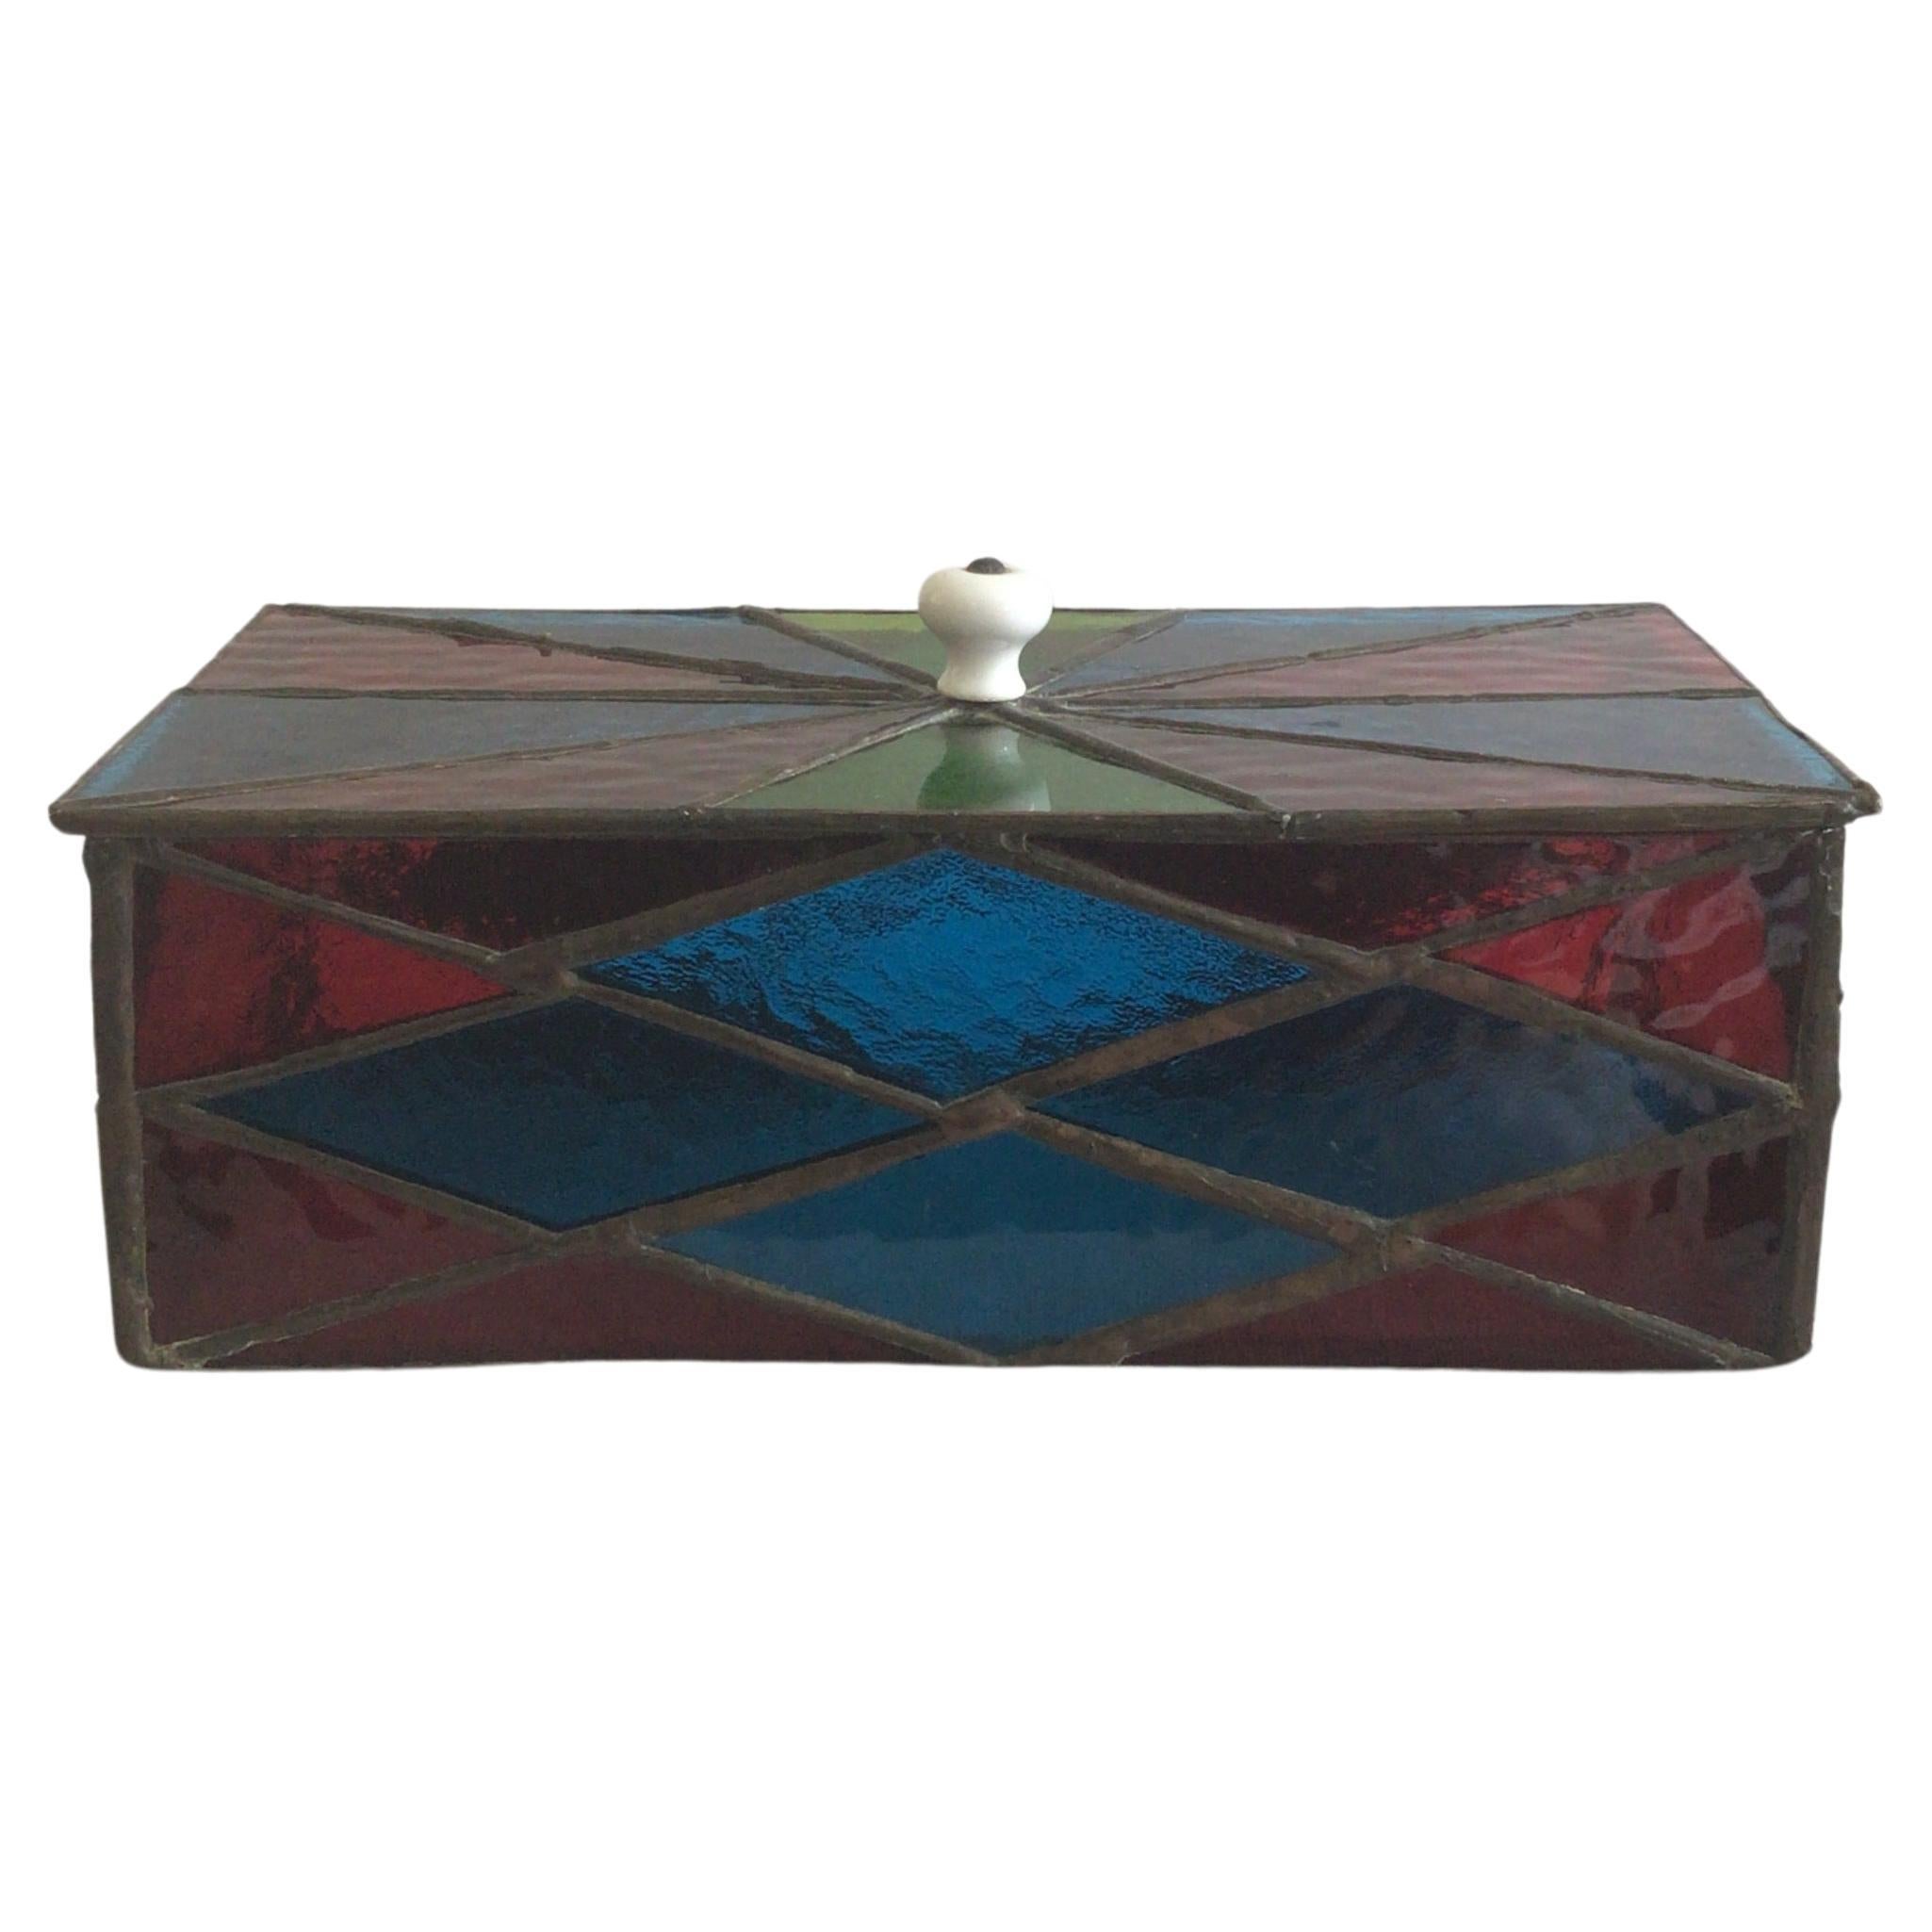 1950s Colorful Leaded Stained Glass Box With Removable Lid